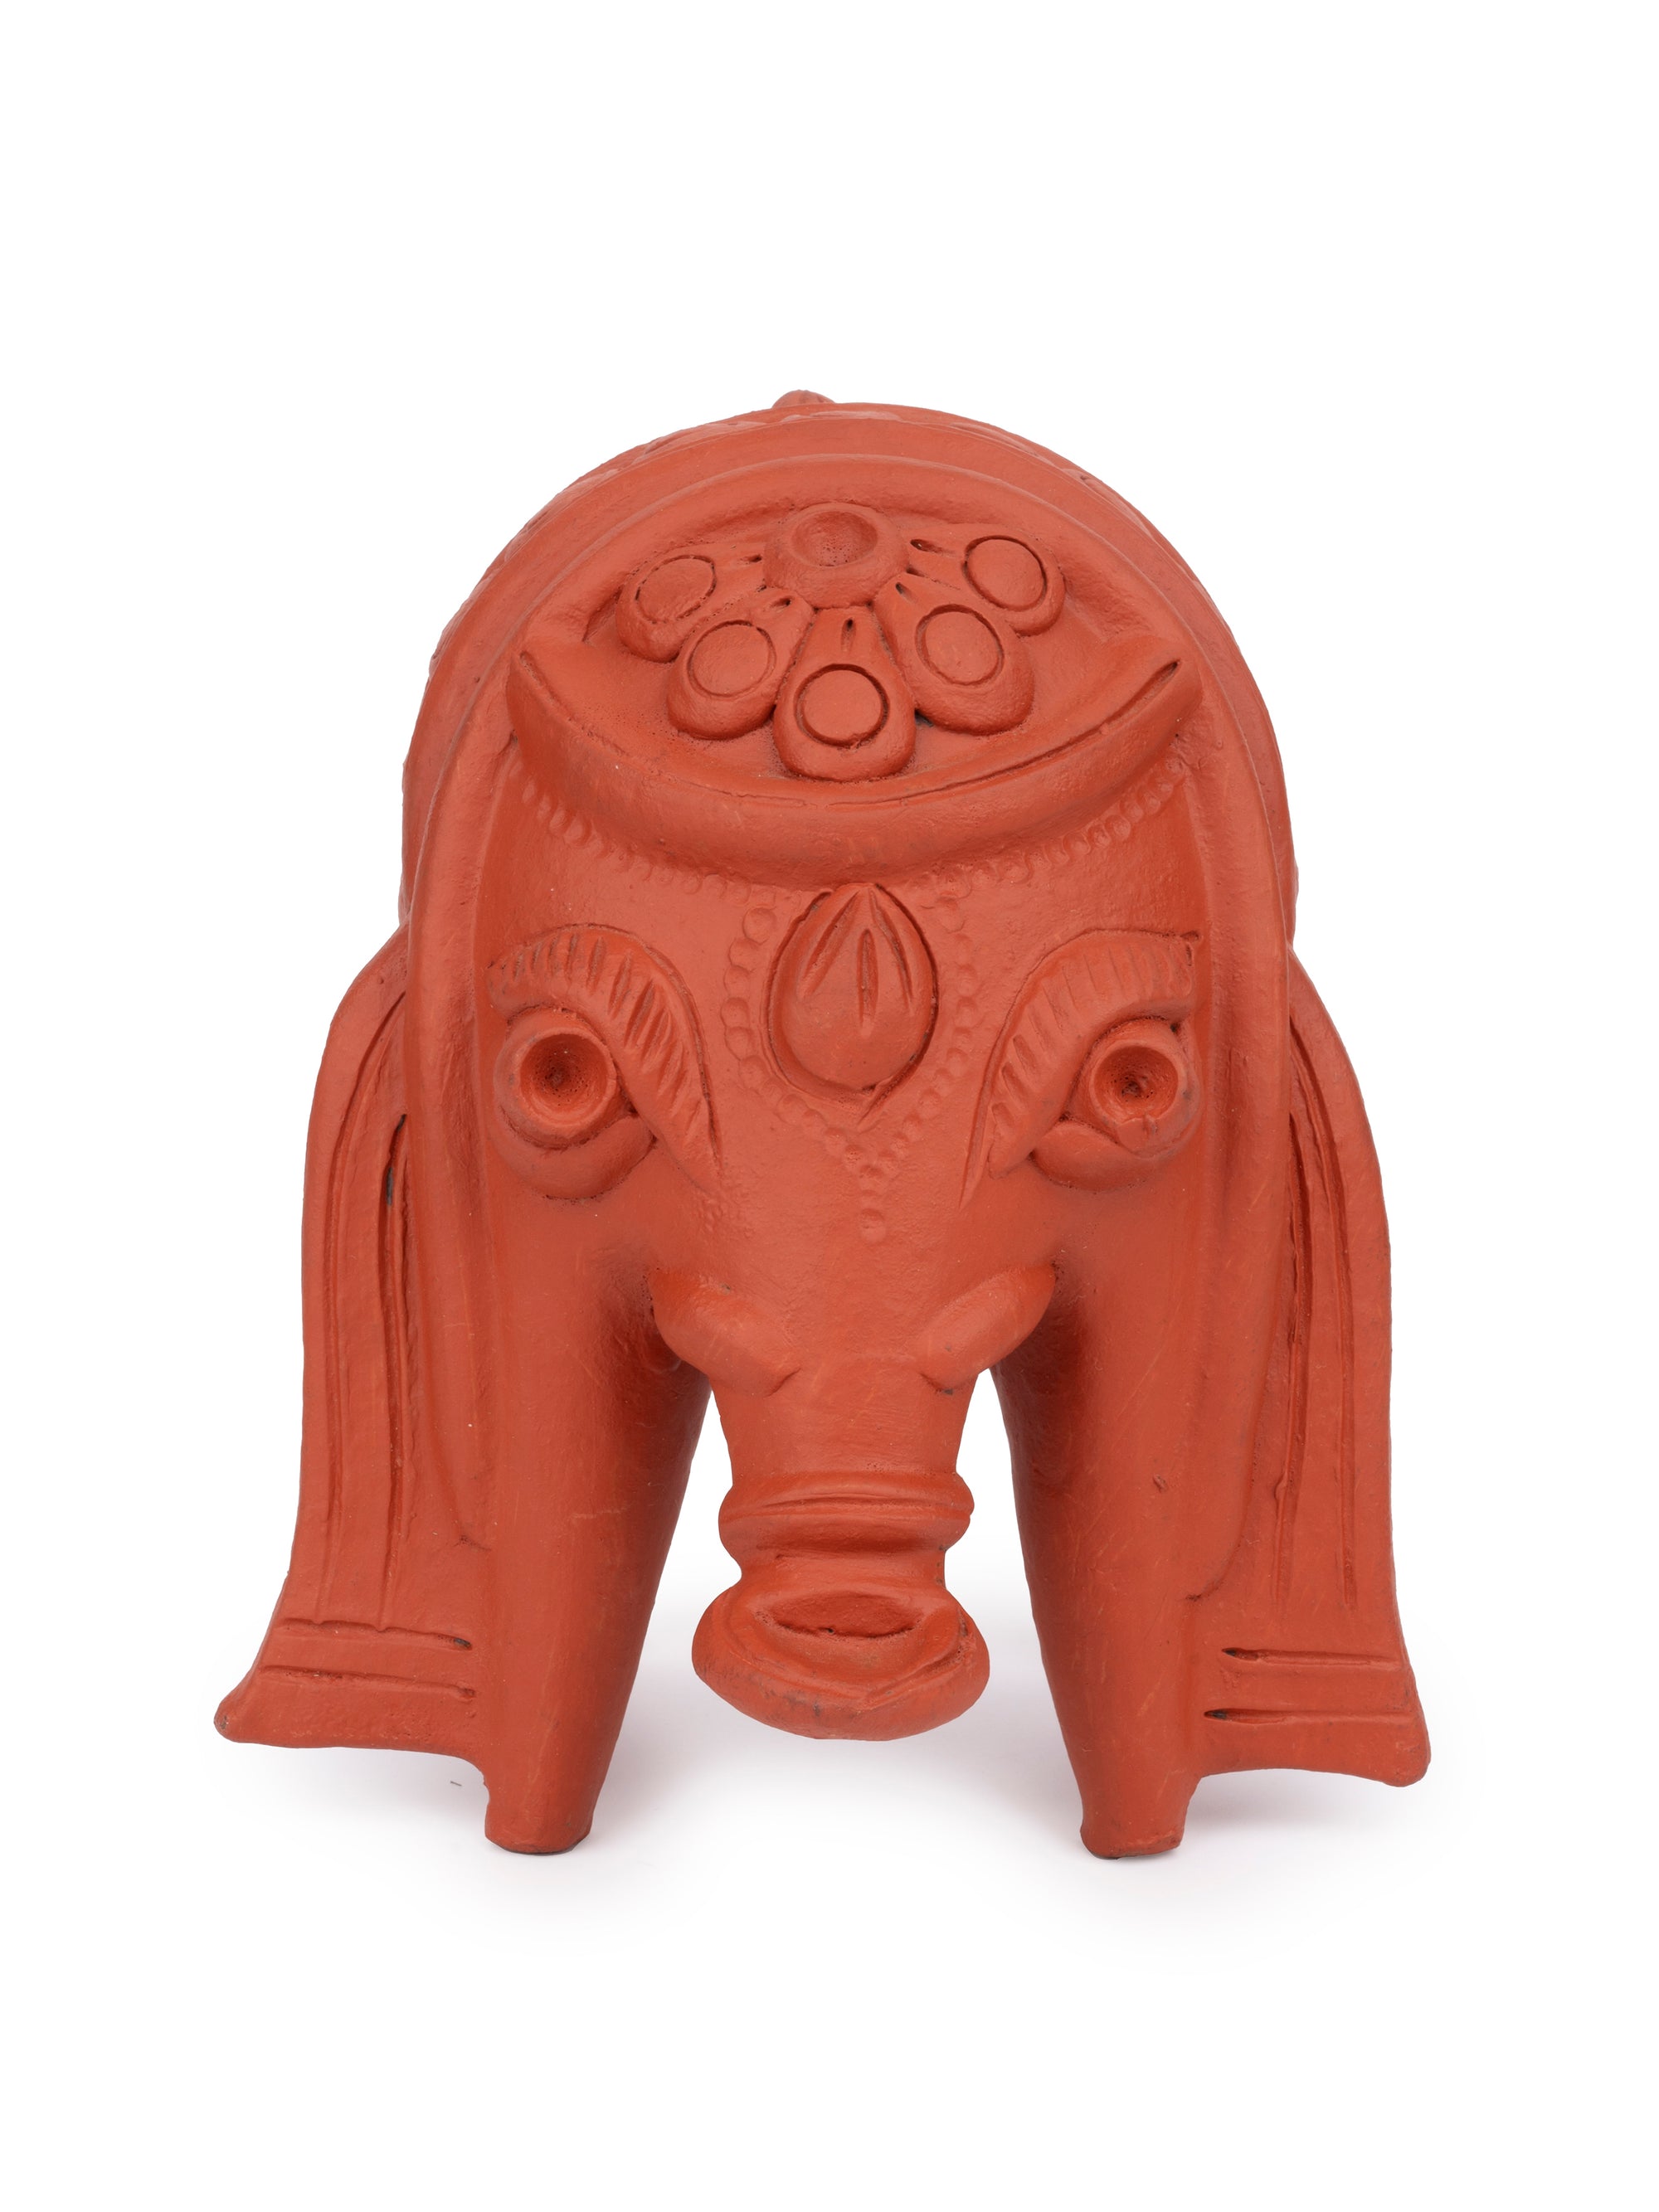 Terracotta Decorative Elephant Figurine - 6 inches height - The Heritage Artifacts